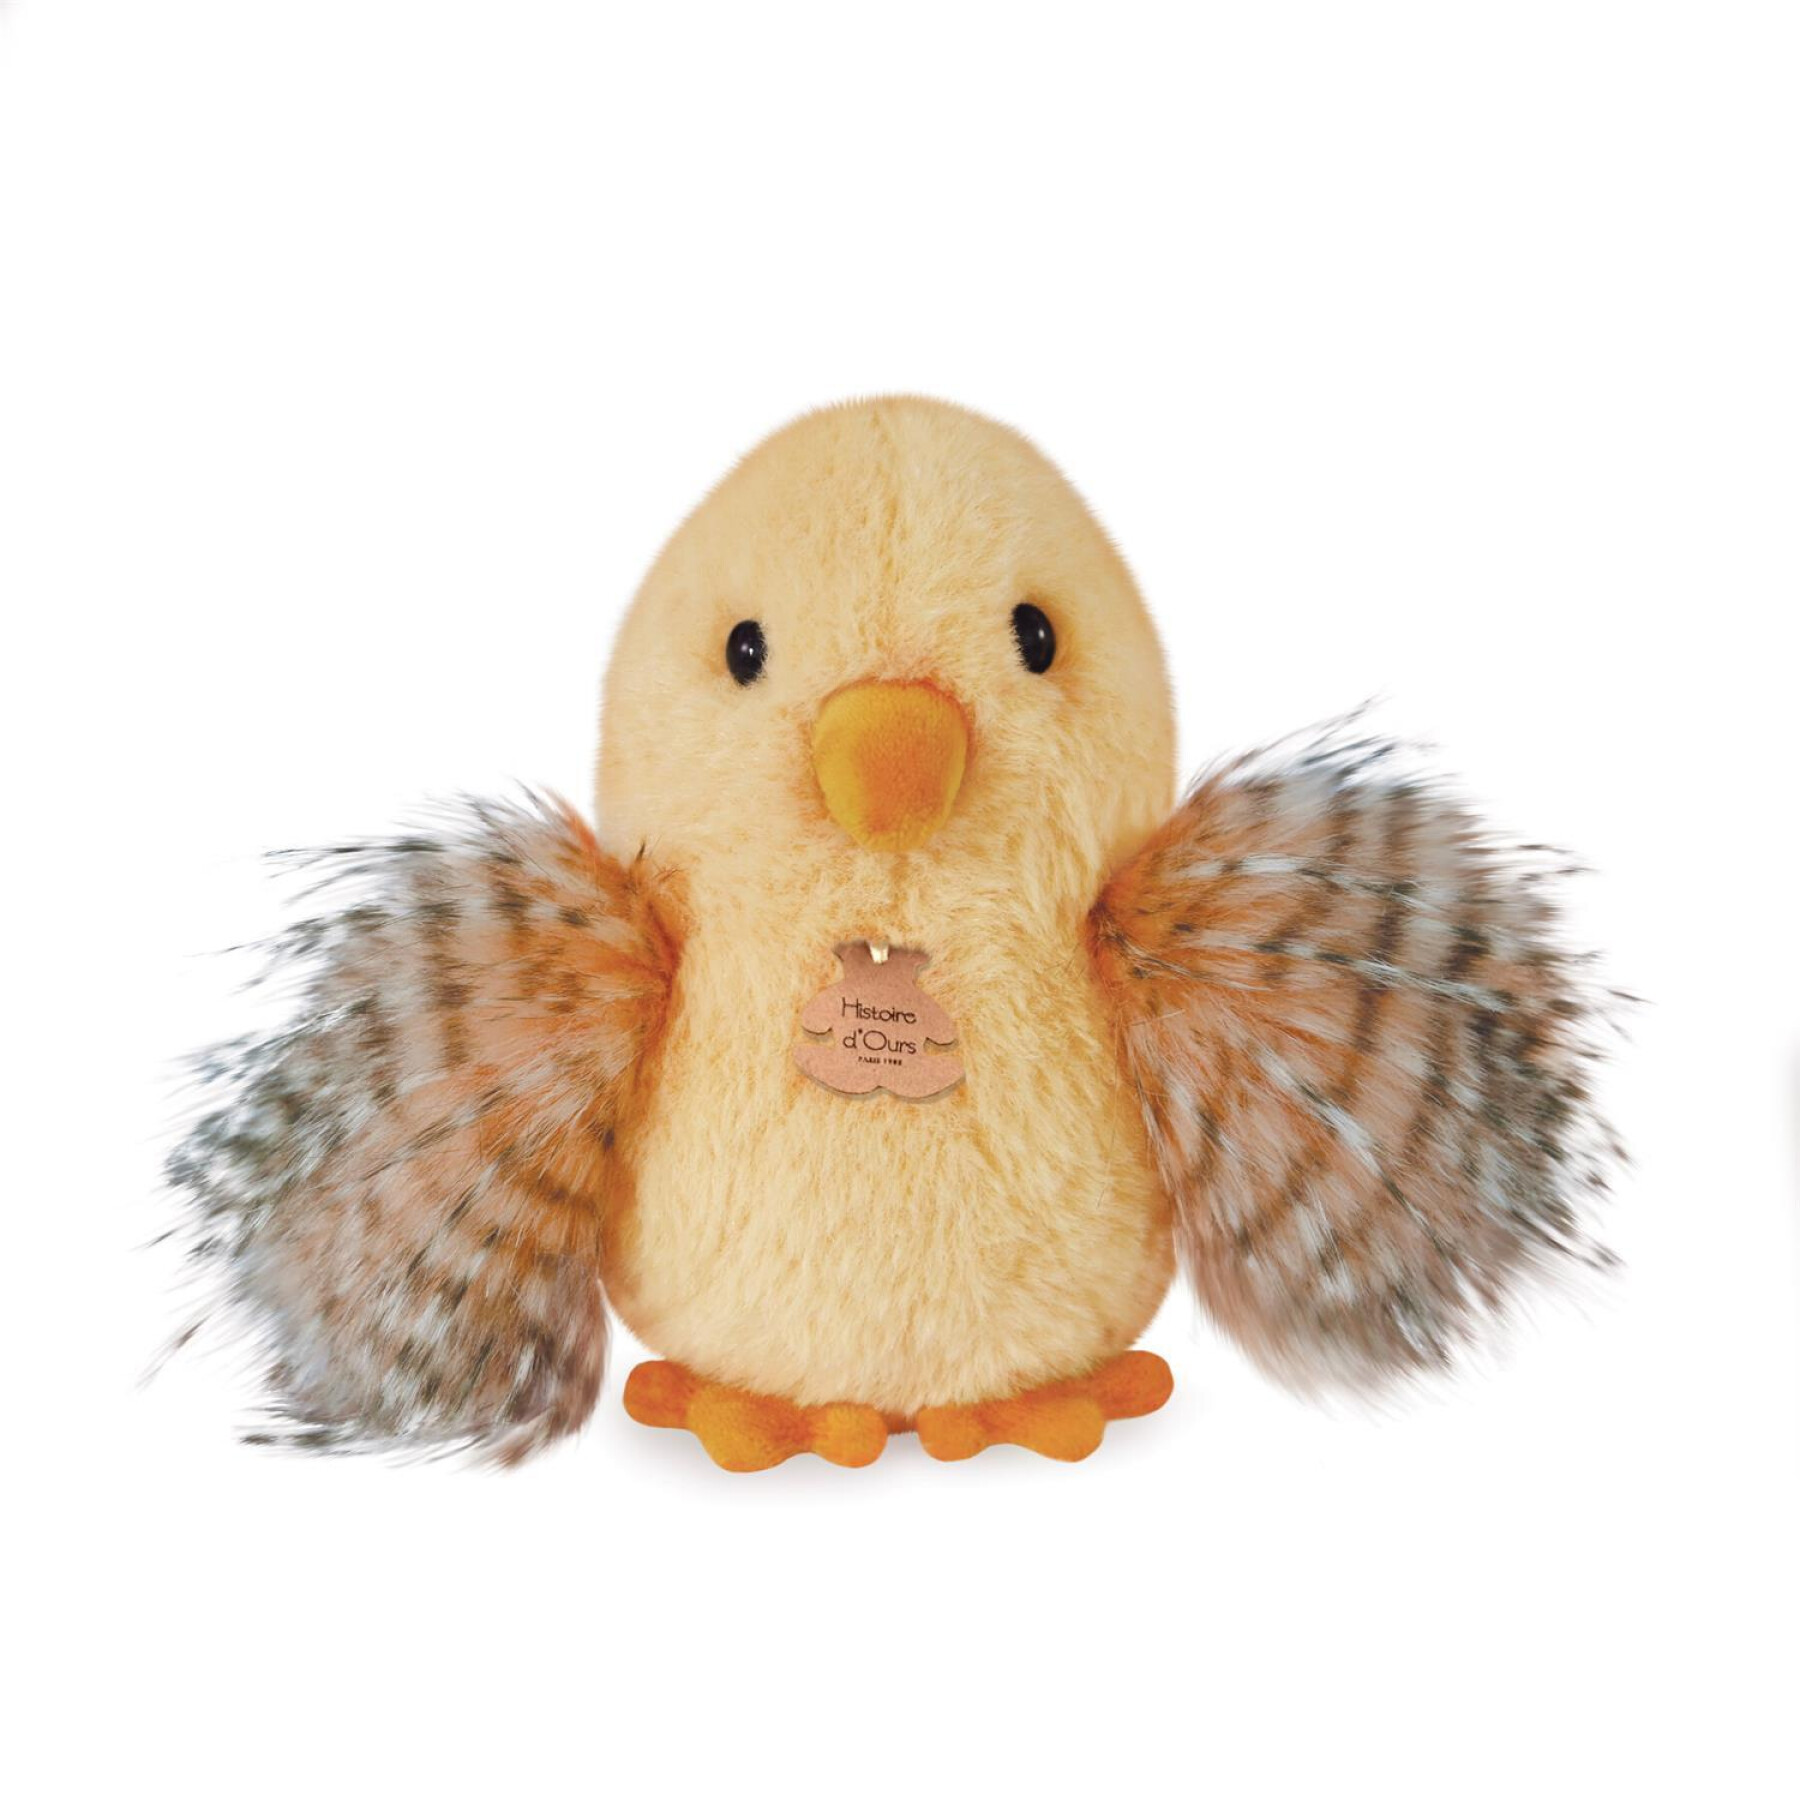 Assorted plush chicks Histoire d'Ours Display  (x3)